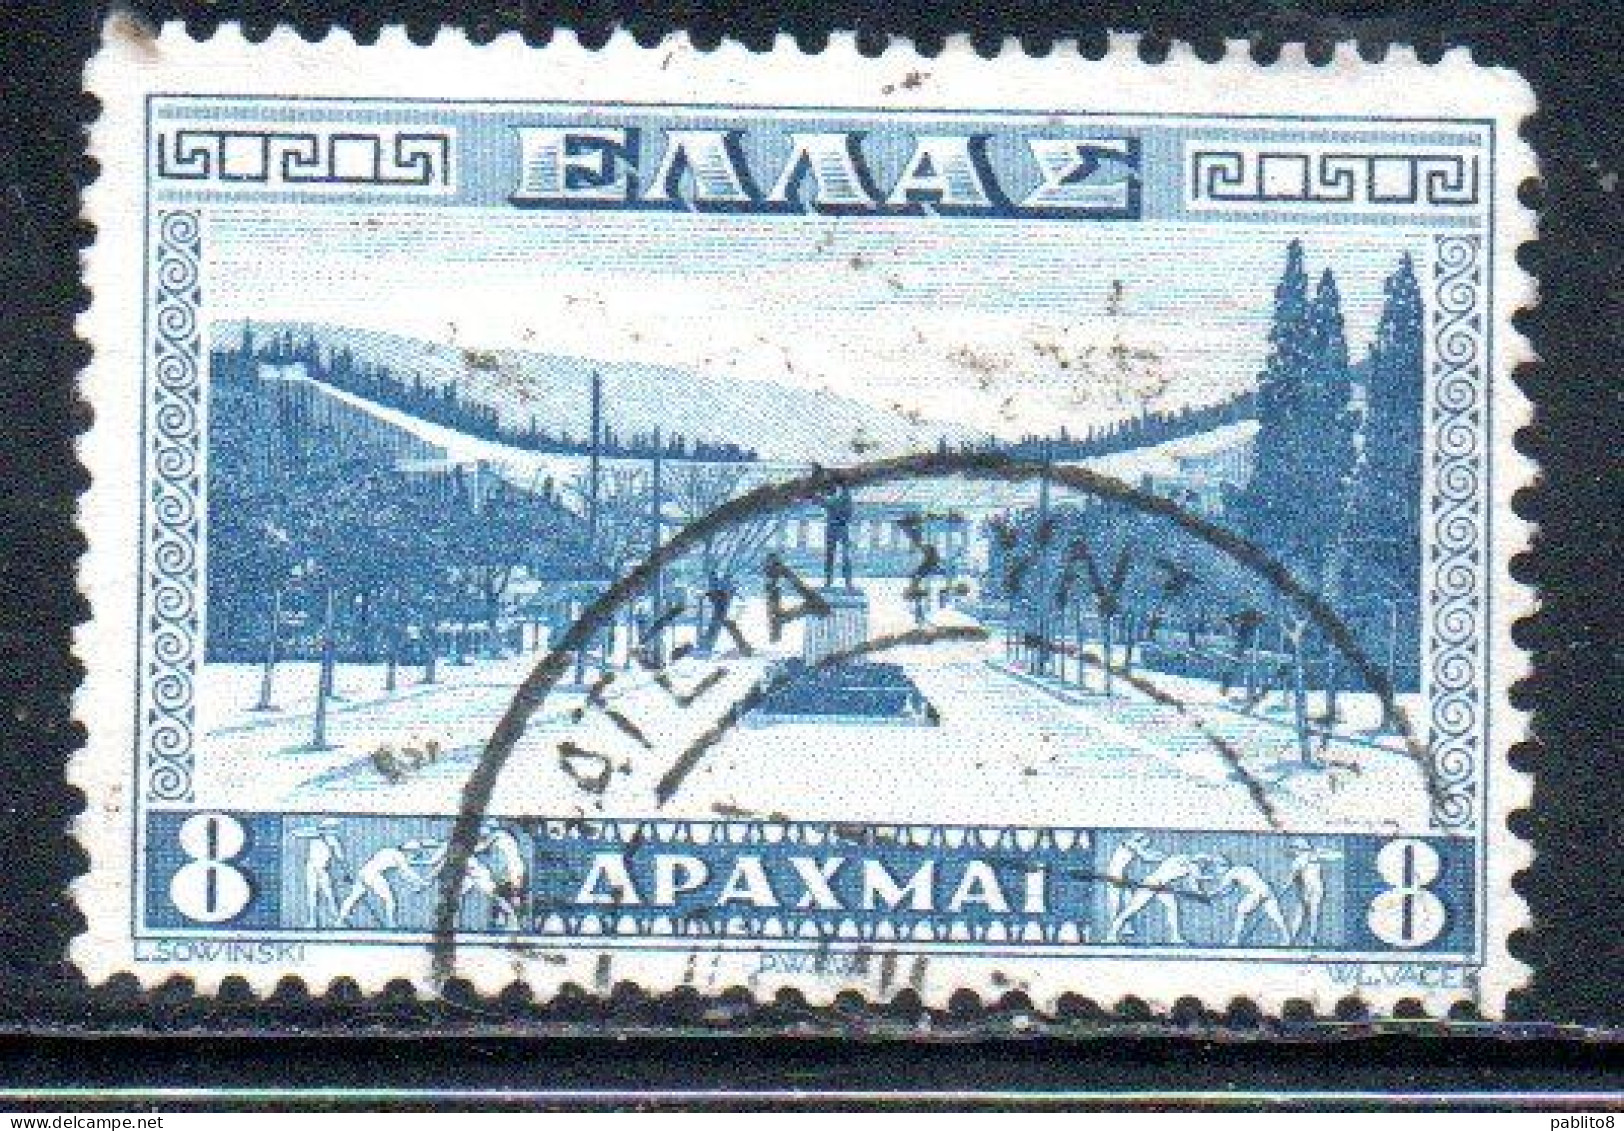 GREECE GRECIA HELLAS 1934 APPROACH TO ATHENS STADIUM 8d USED USATO OBLITERE' - Usados